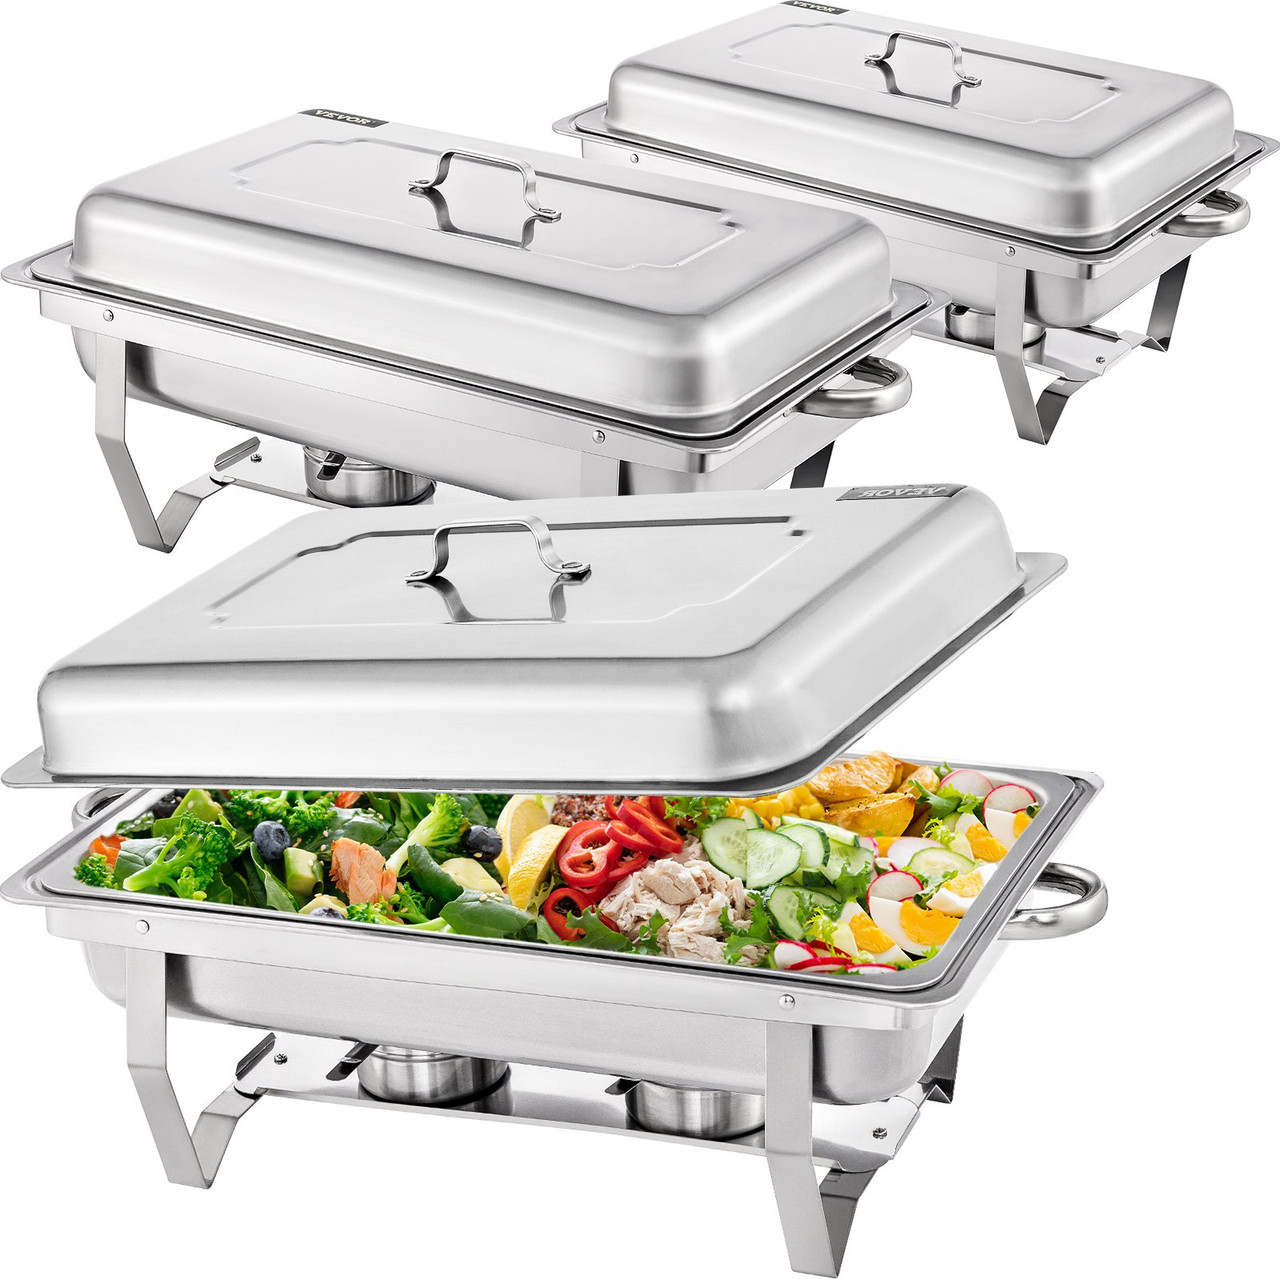 Chafing Dish 3 Packs, 9 Quart Stainless Steel Chafer Complete Set, Rectangular Chafers for Catering Buffet Warmer Set with Folding Frame